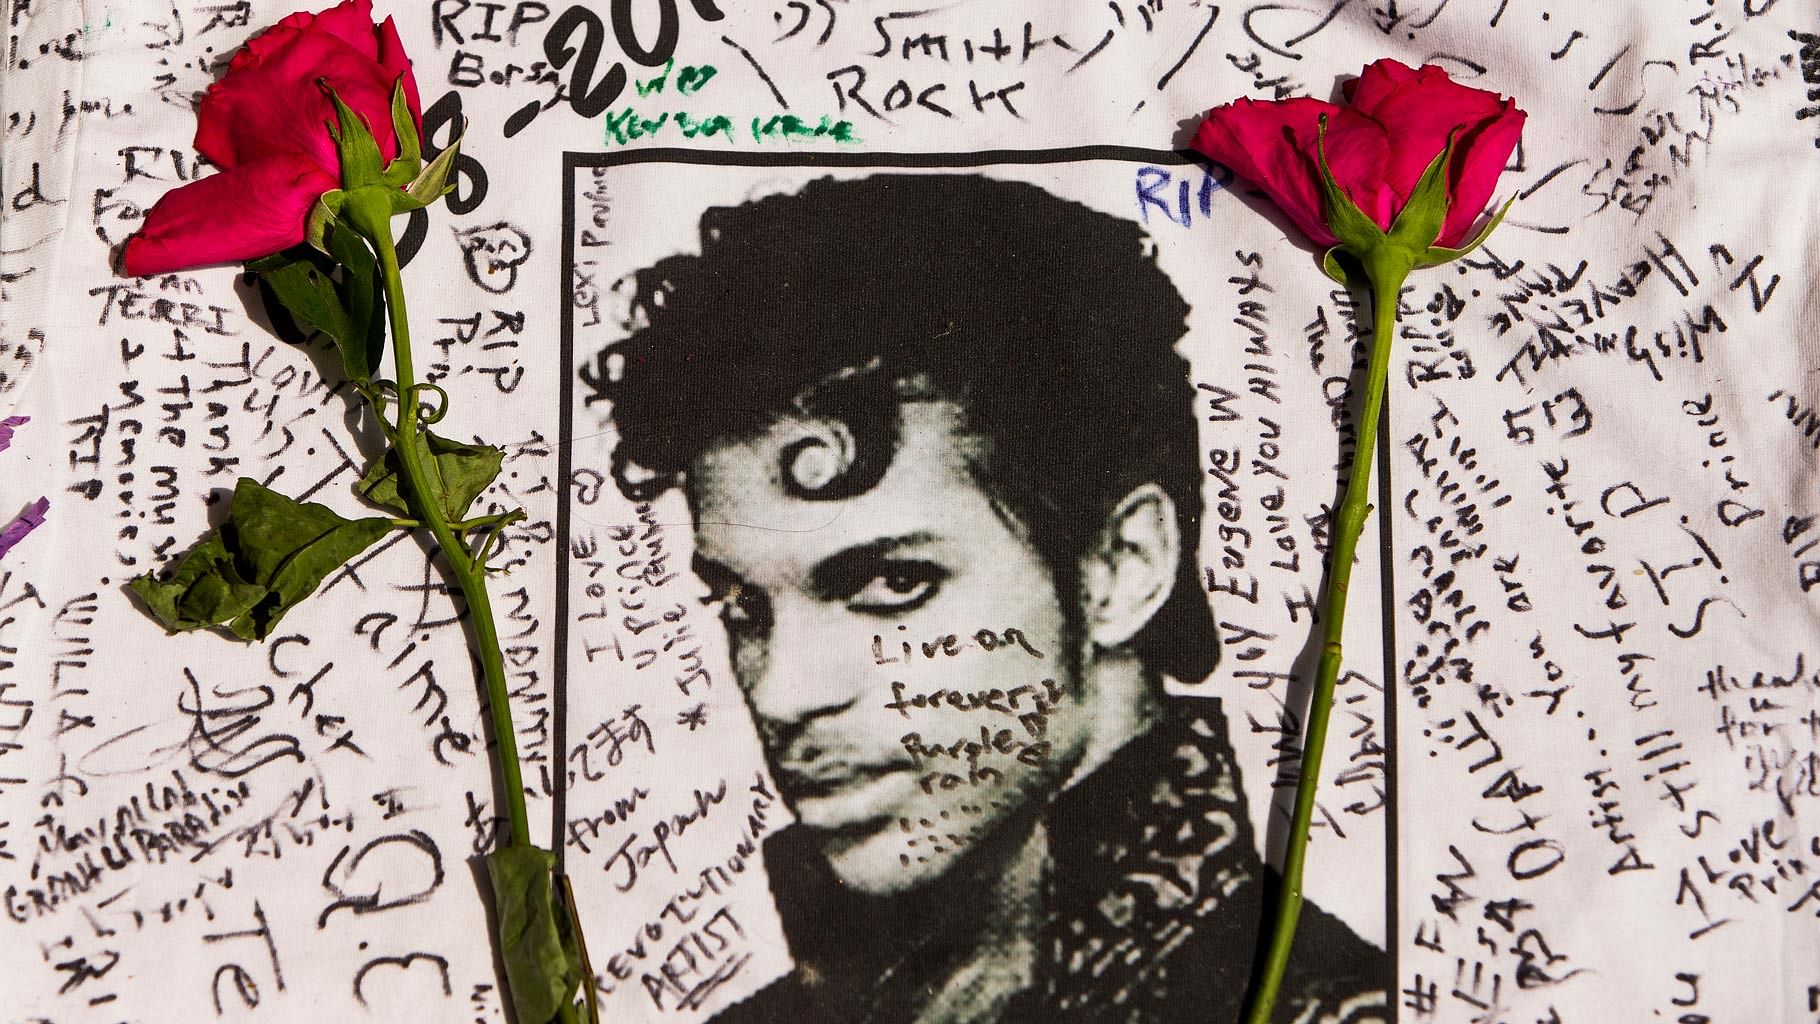 Flowers lay on a T-shirt signed by fans of singer Prince at a makeshift memorial place created outside Apollo Theater in New York. (Photo: AP)